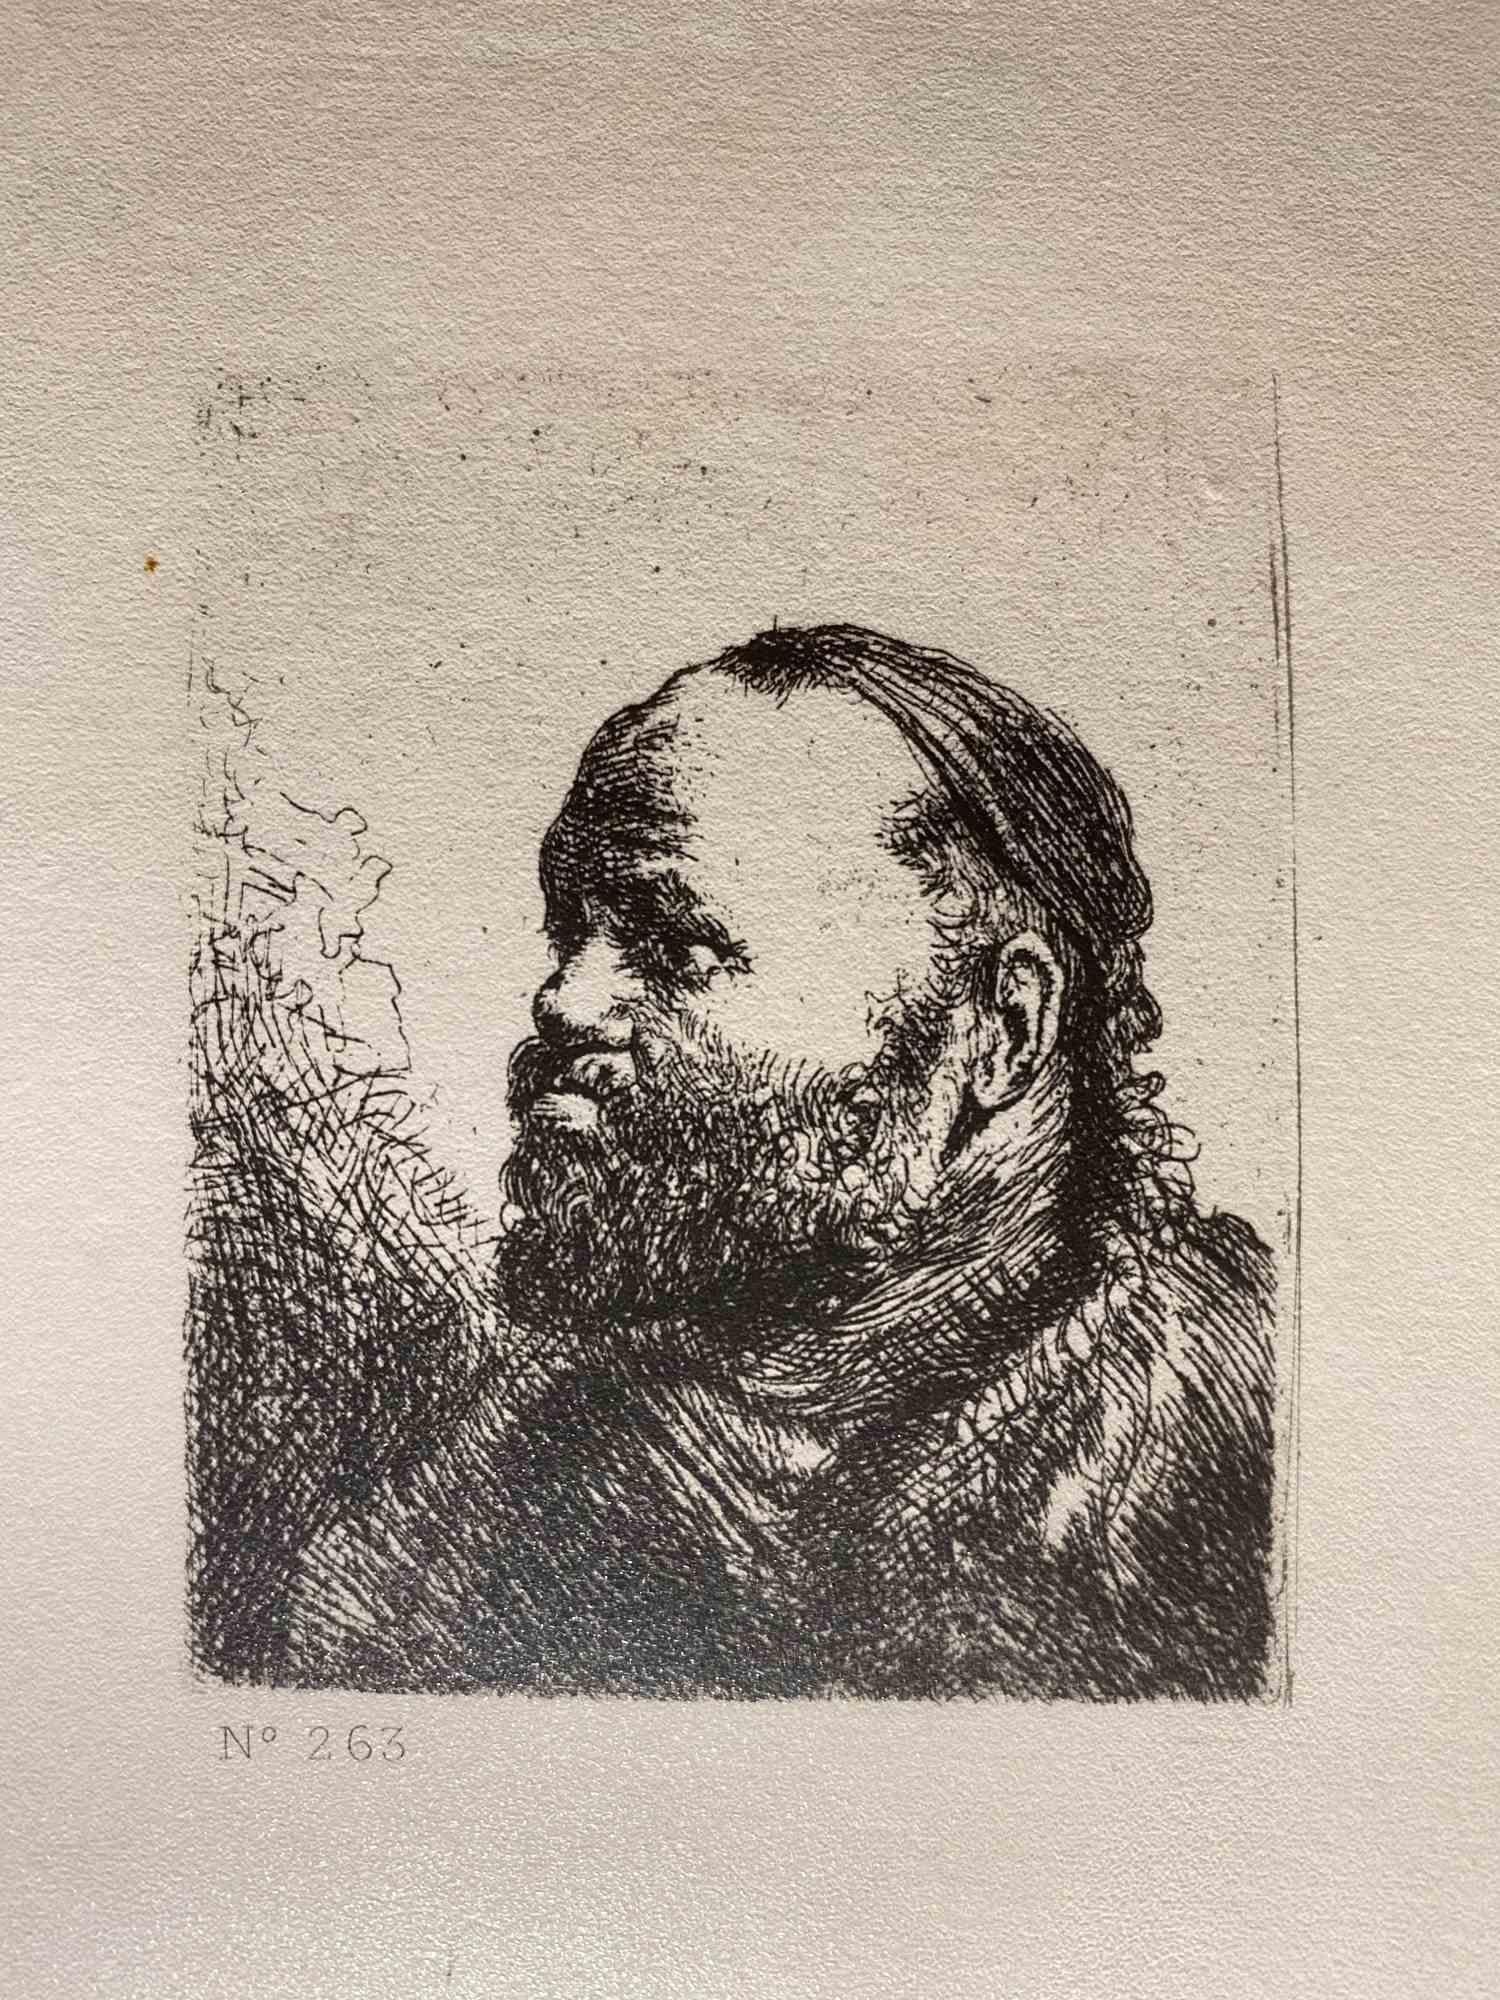 Charles Amand Durand Figurative Print - Portrait of A Man - Engraving after Rembrandt - 19th Century